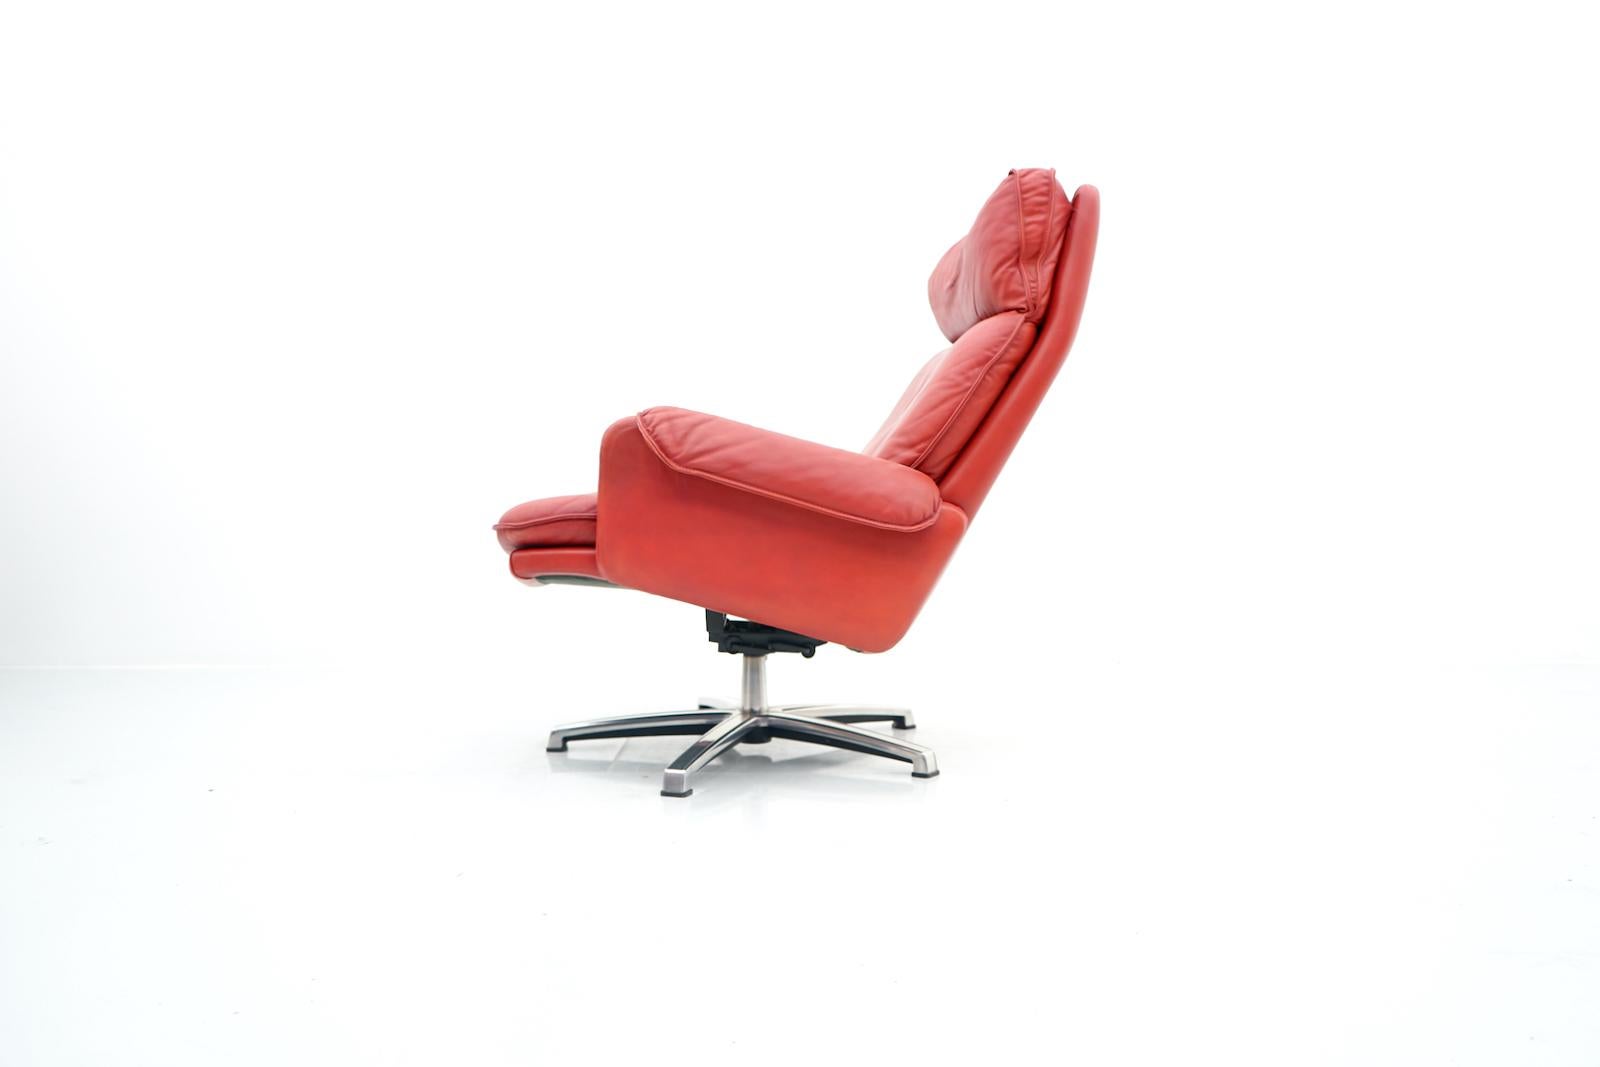 Late 20th Century Norwegian Swivel Lounge Chair in Red Leather, 1970s